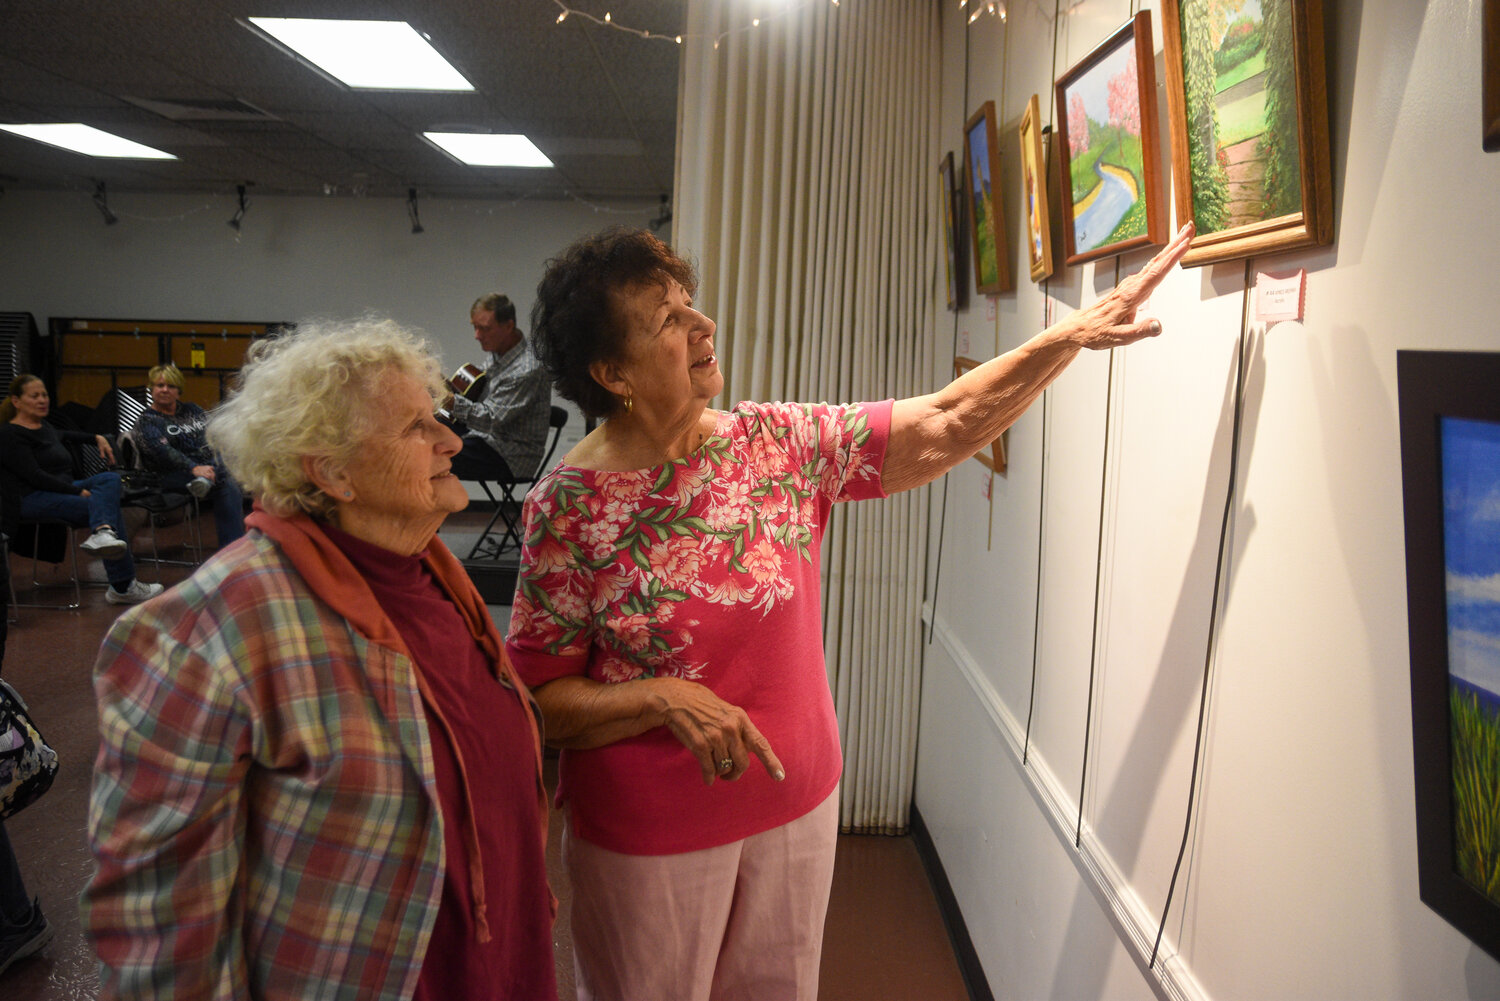 Zanetto got to share the special occasion of her artist reception for her work on display at Bellmore Memorial Library with her teacher, Joan Lazarus.